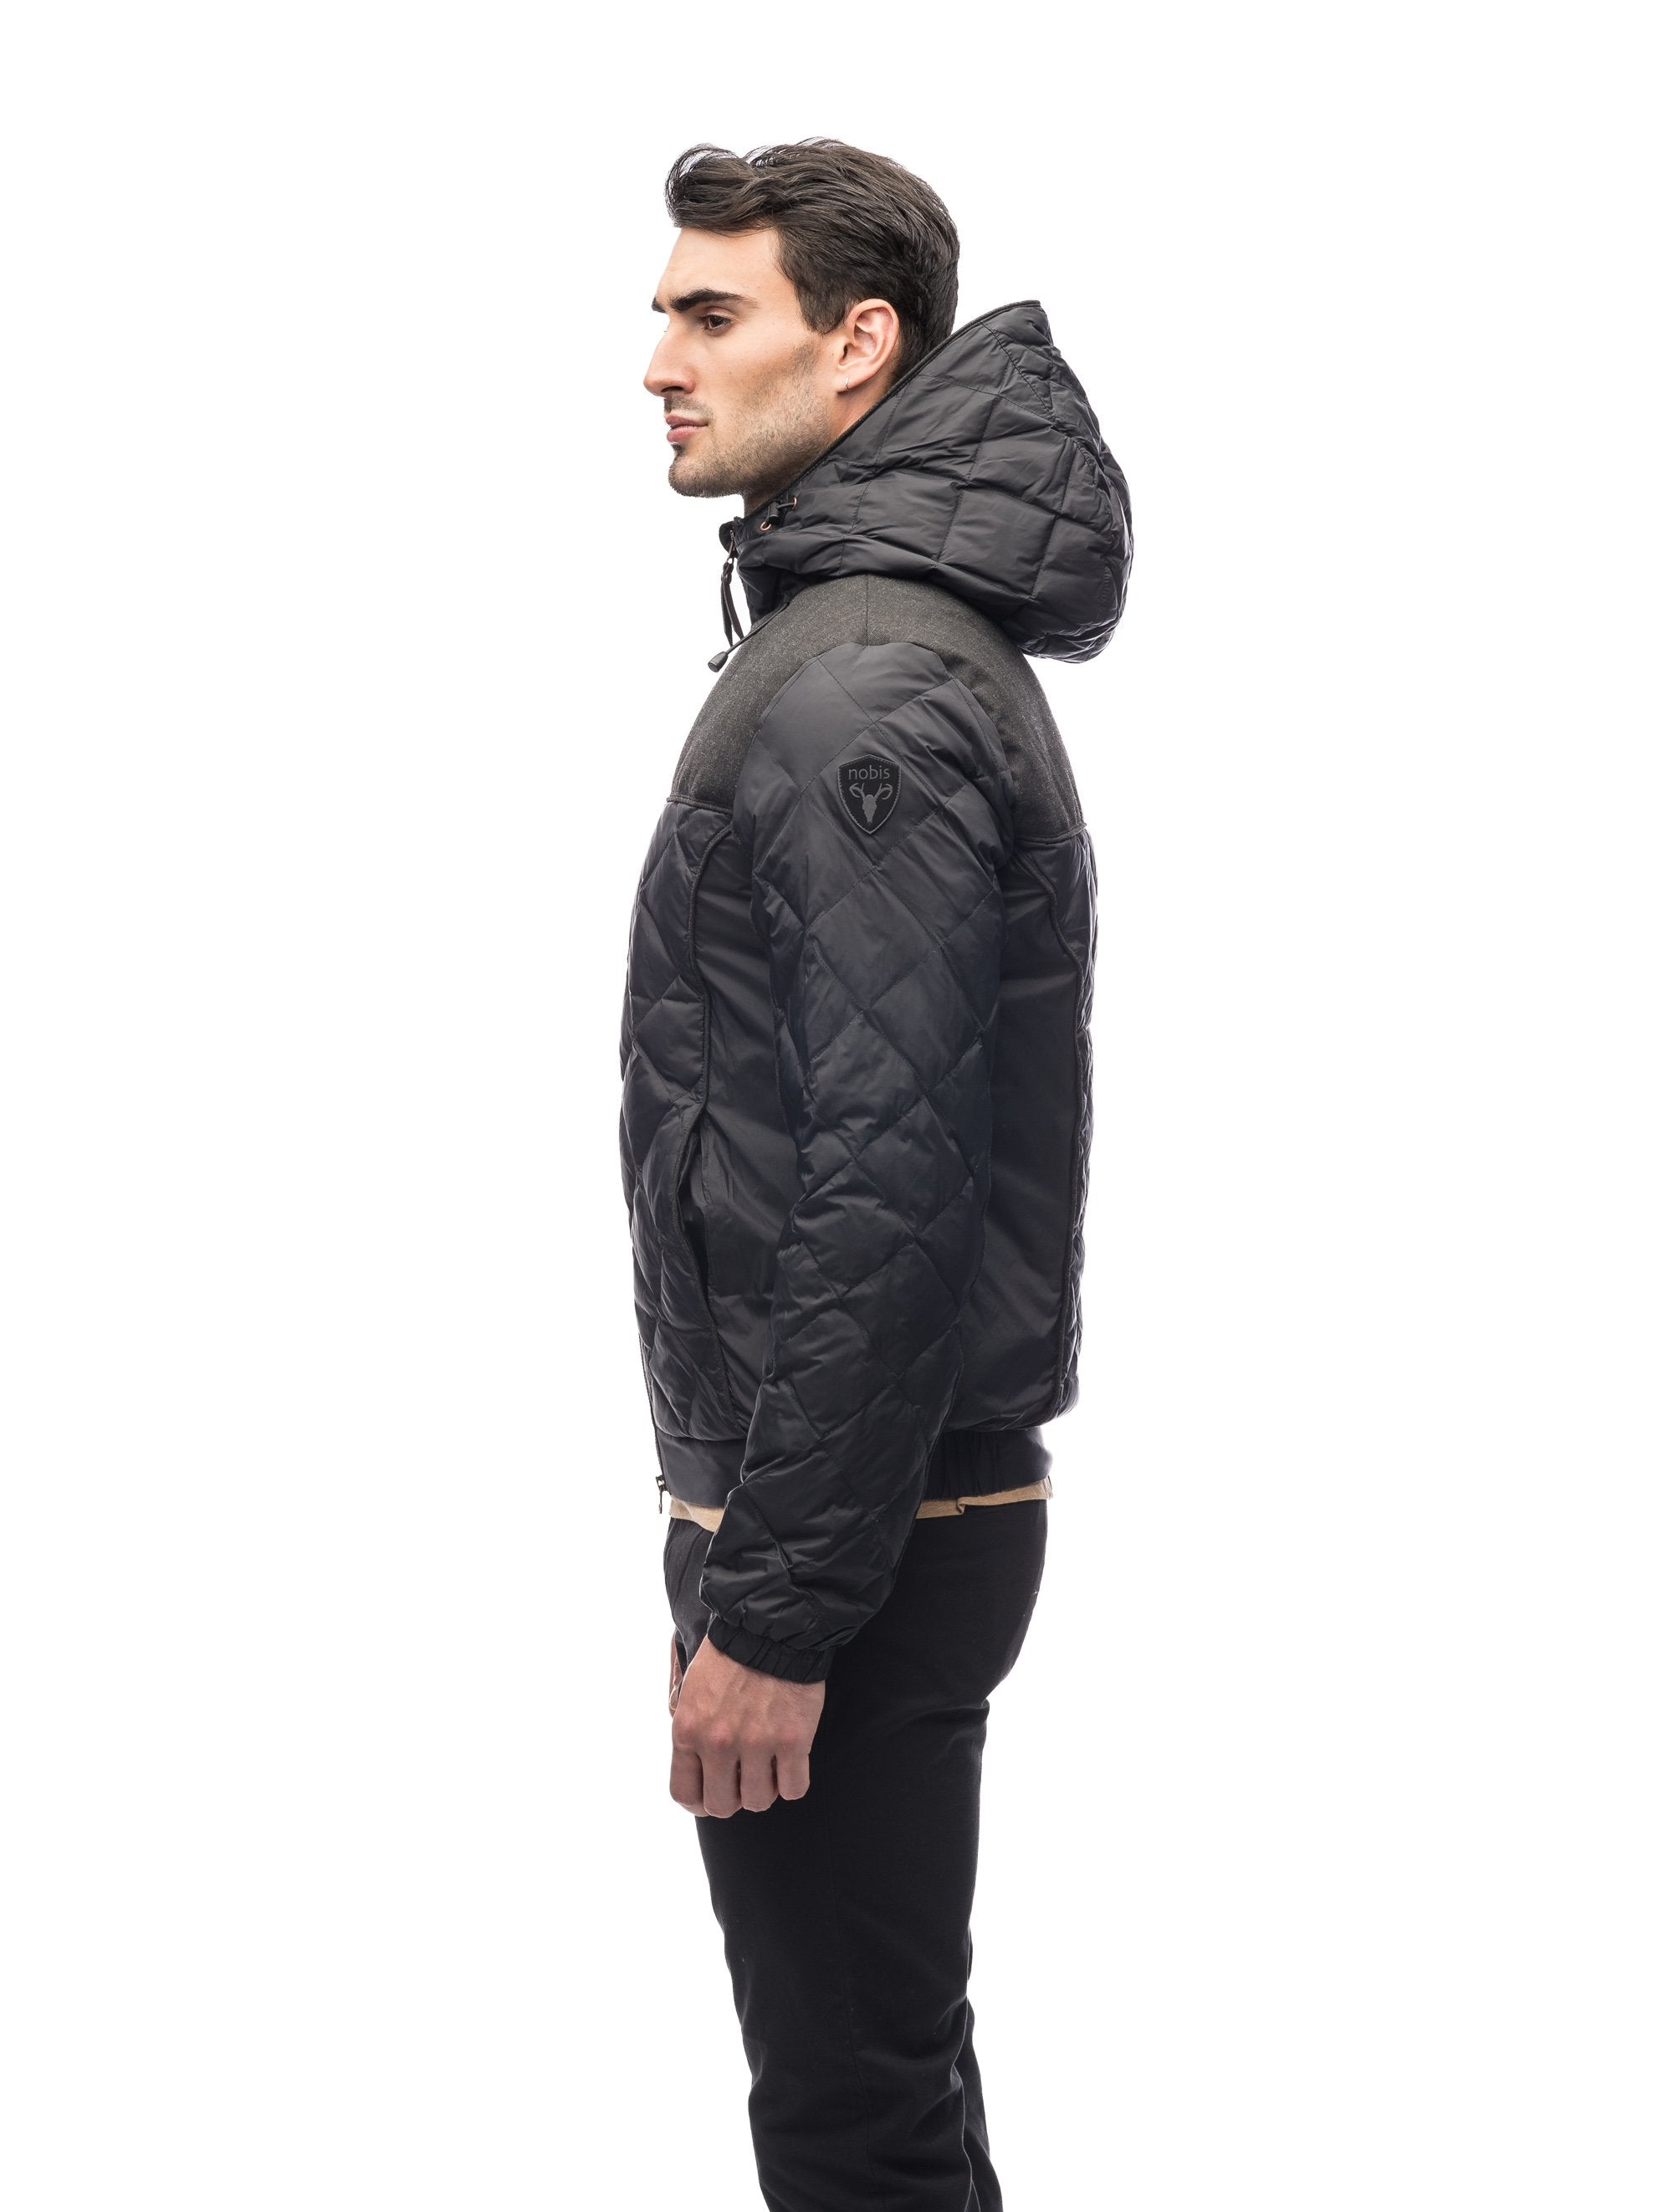 Ilse Jacobsen Padded Quilt Coat - 1062.50 €. Buy Quilted jackets from Ilse  Jacobsen online at Boozt.com. Fast delivery and easy returns